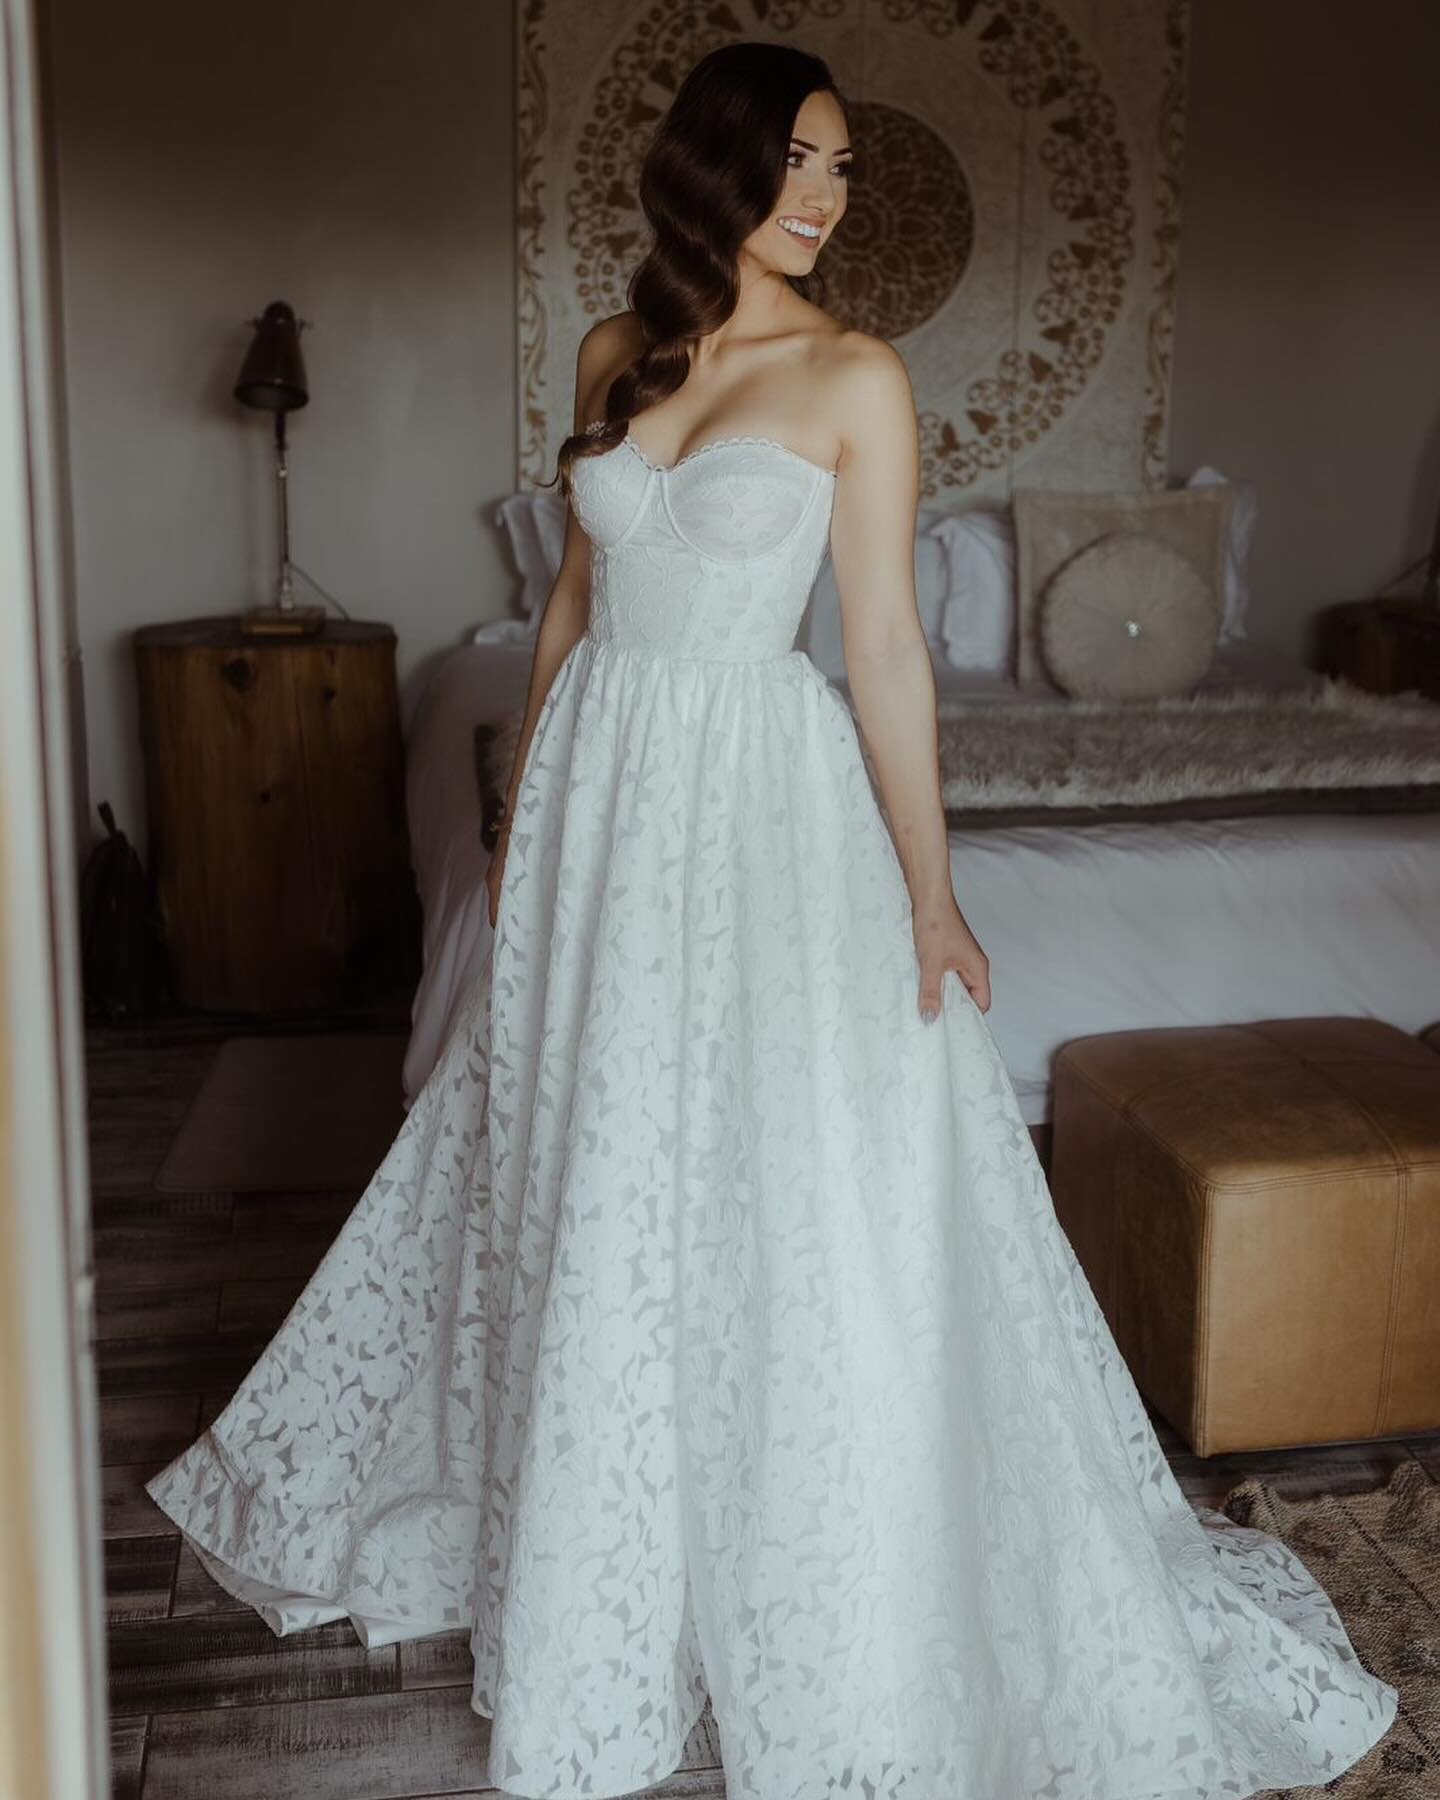 Our gorgeous #TWCrealbride @carmengeyser looked breathtaking on her #weddingday in her Vilsa by @annasposagroup_official available exclusively at TWC ✨ Photos @frankandthemisses